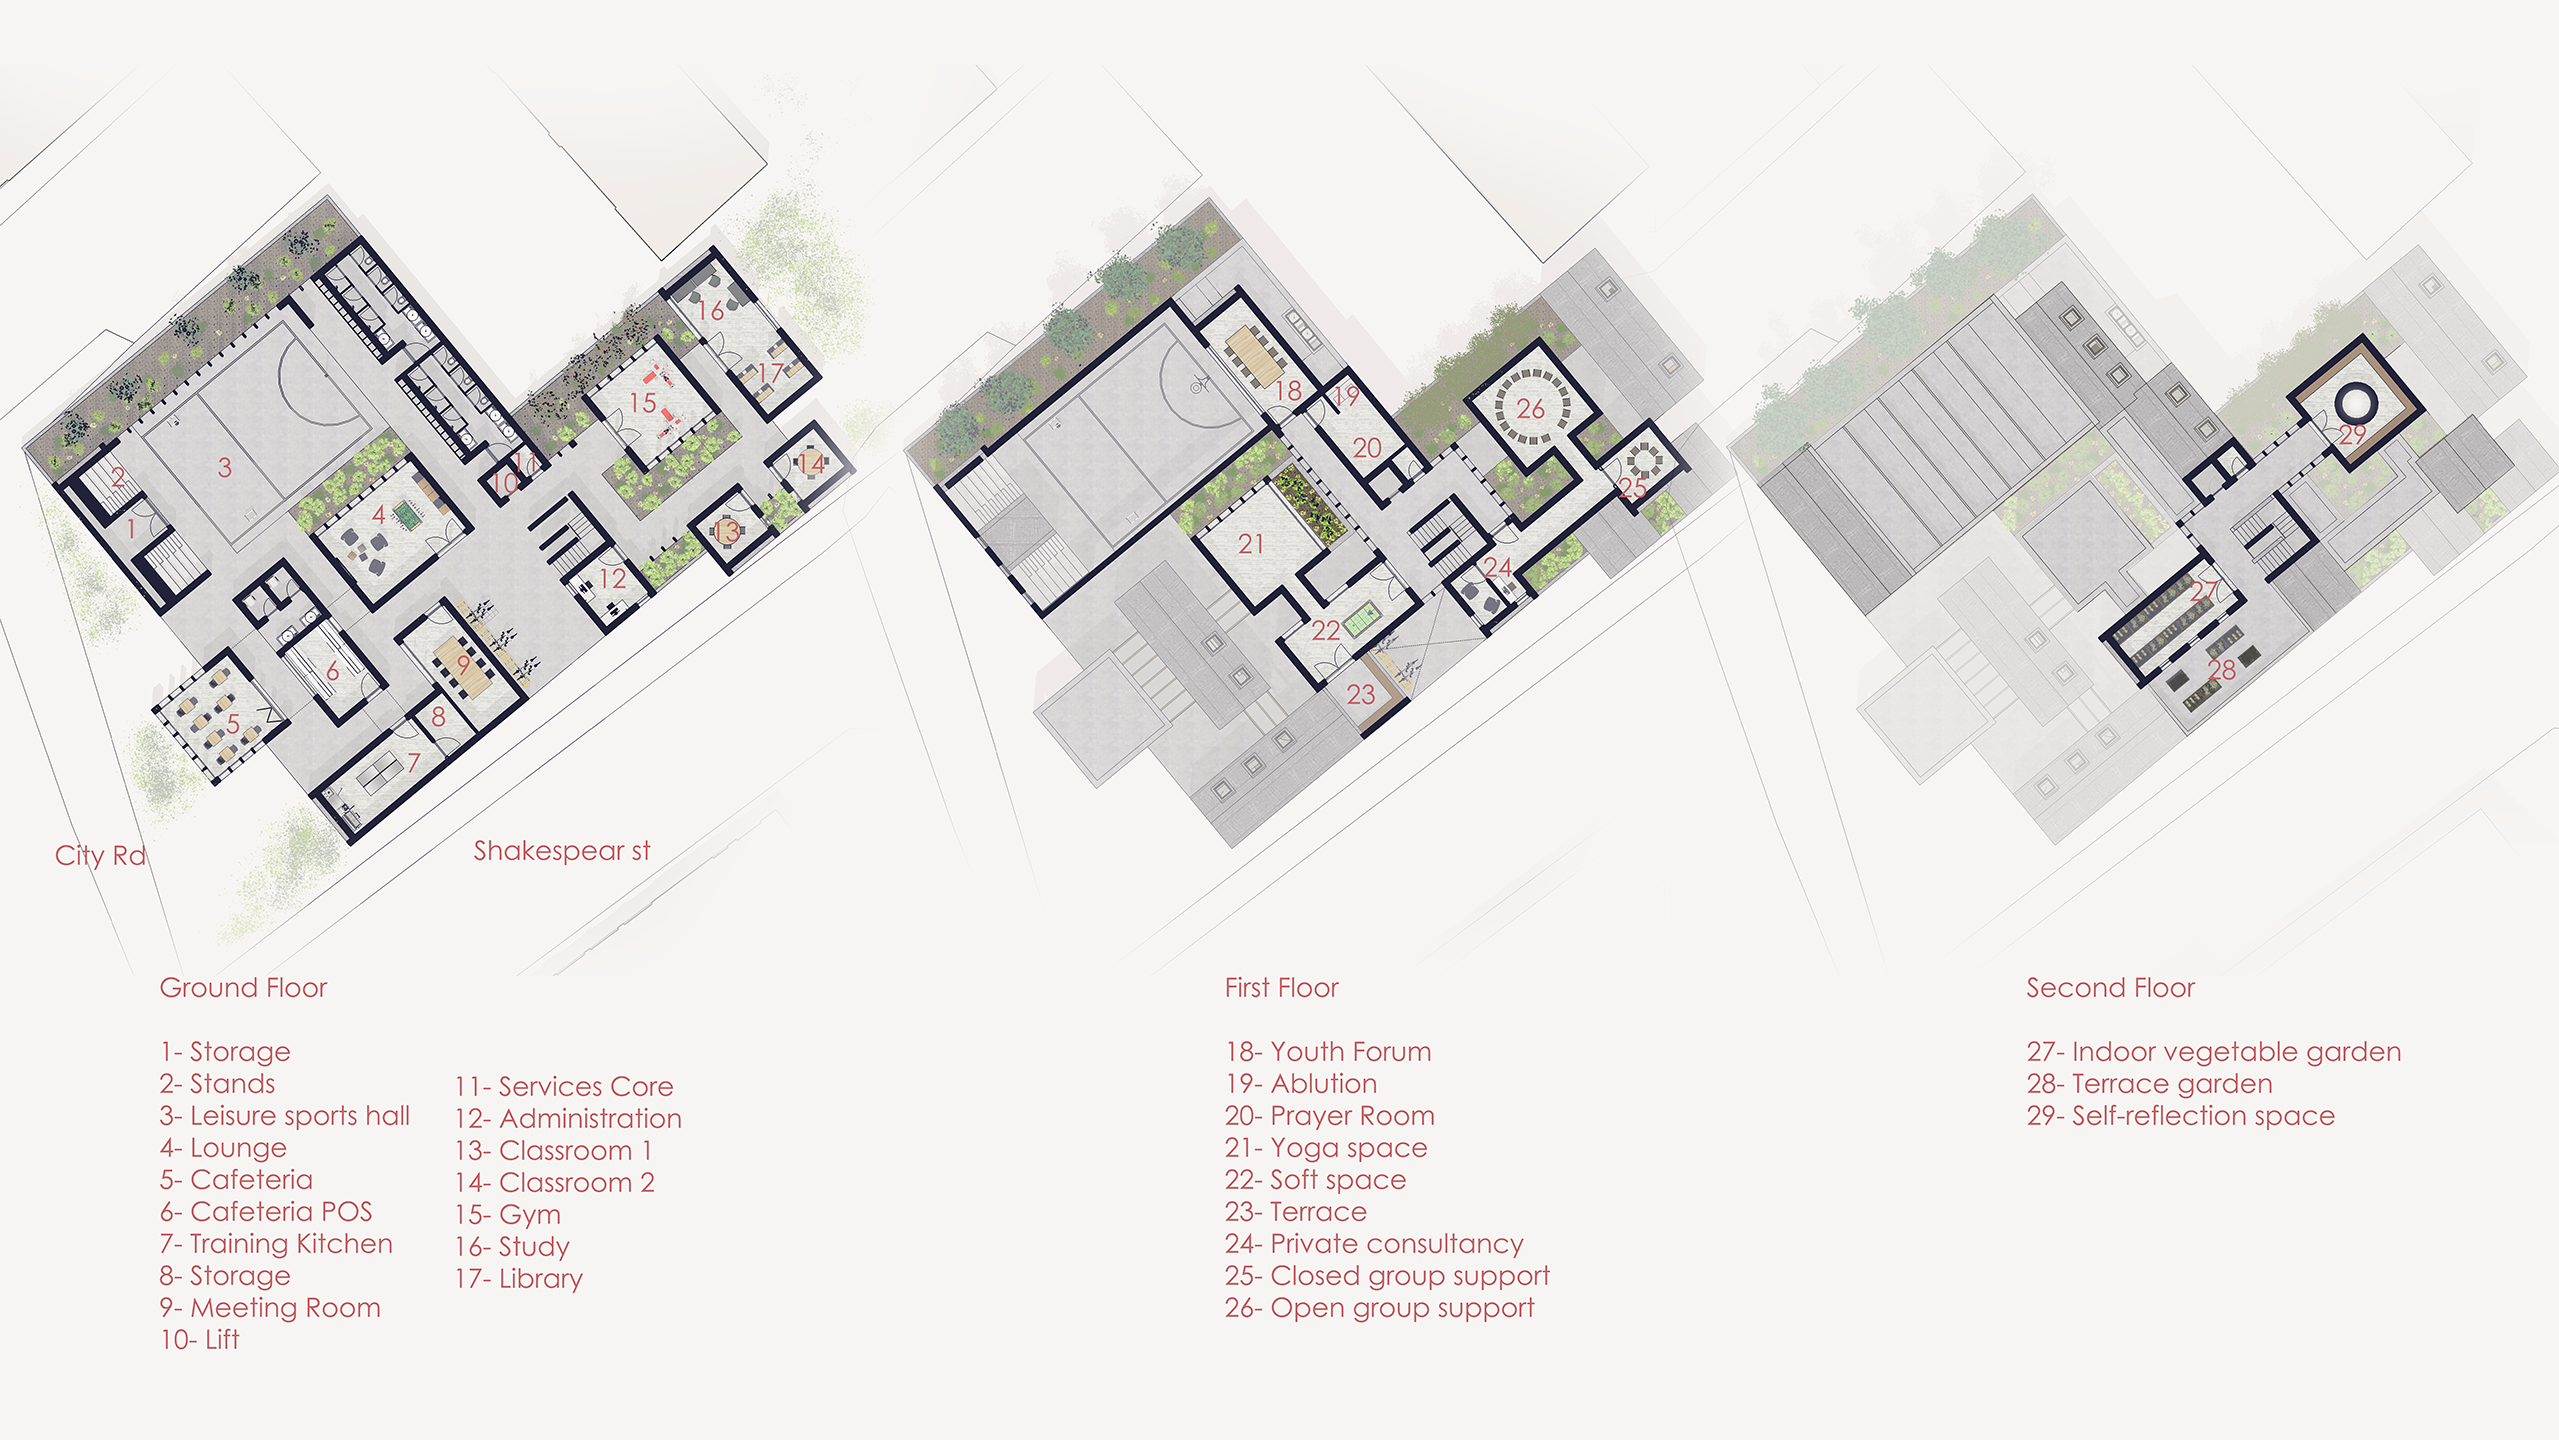 3 story plan layouts. Each block advancing privacy further into the building